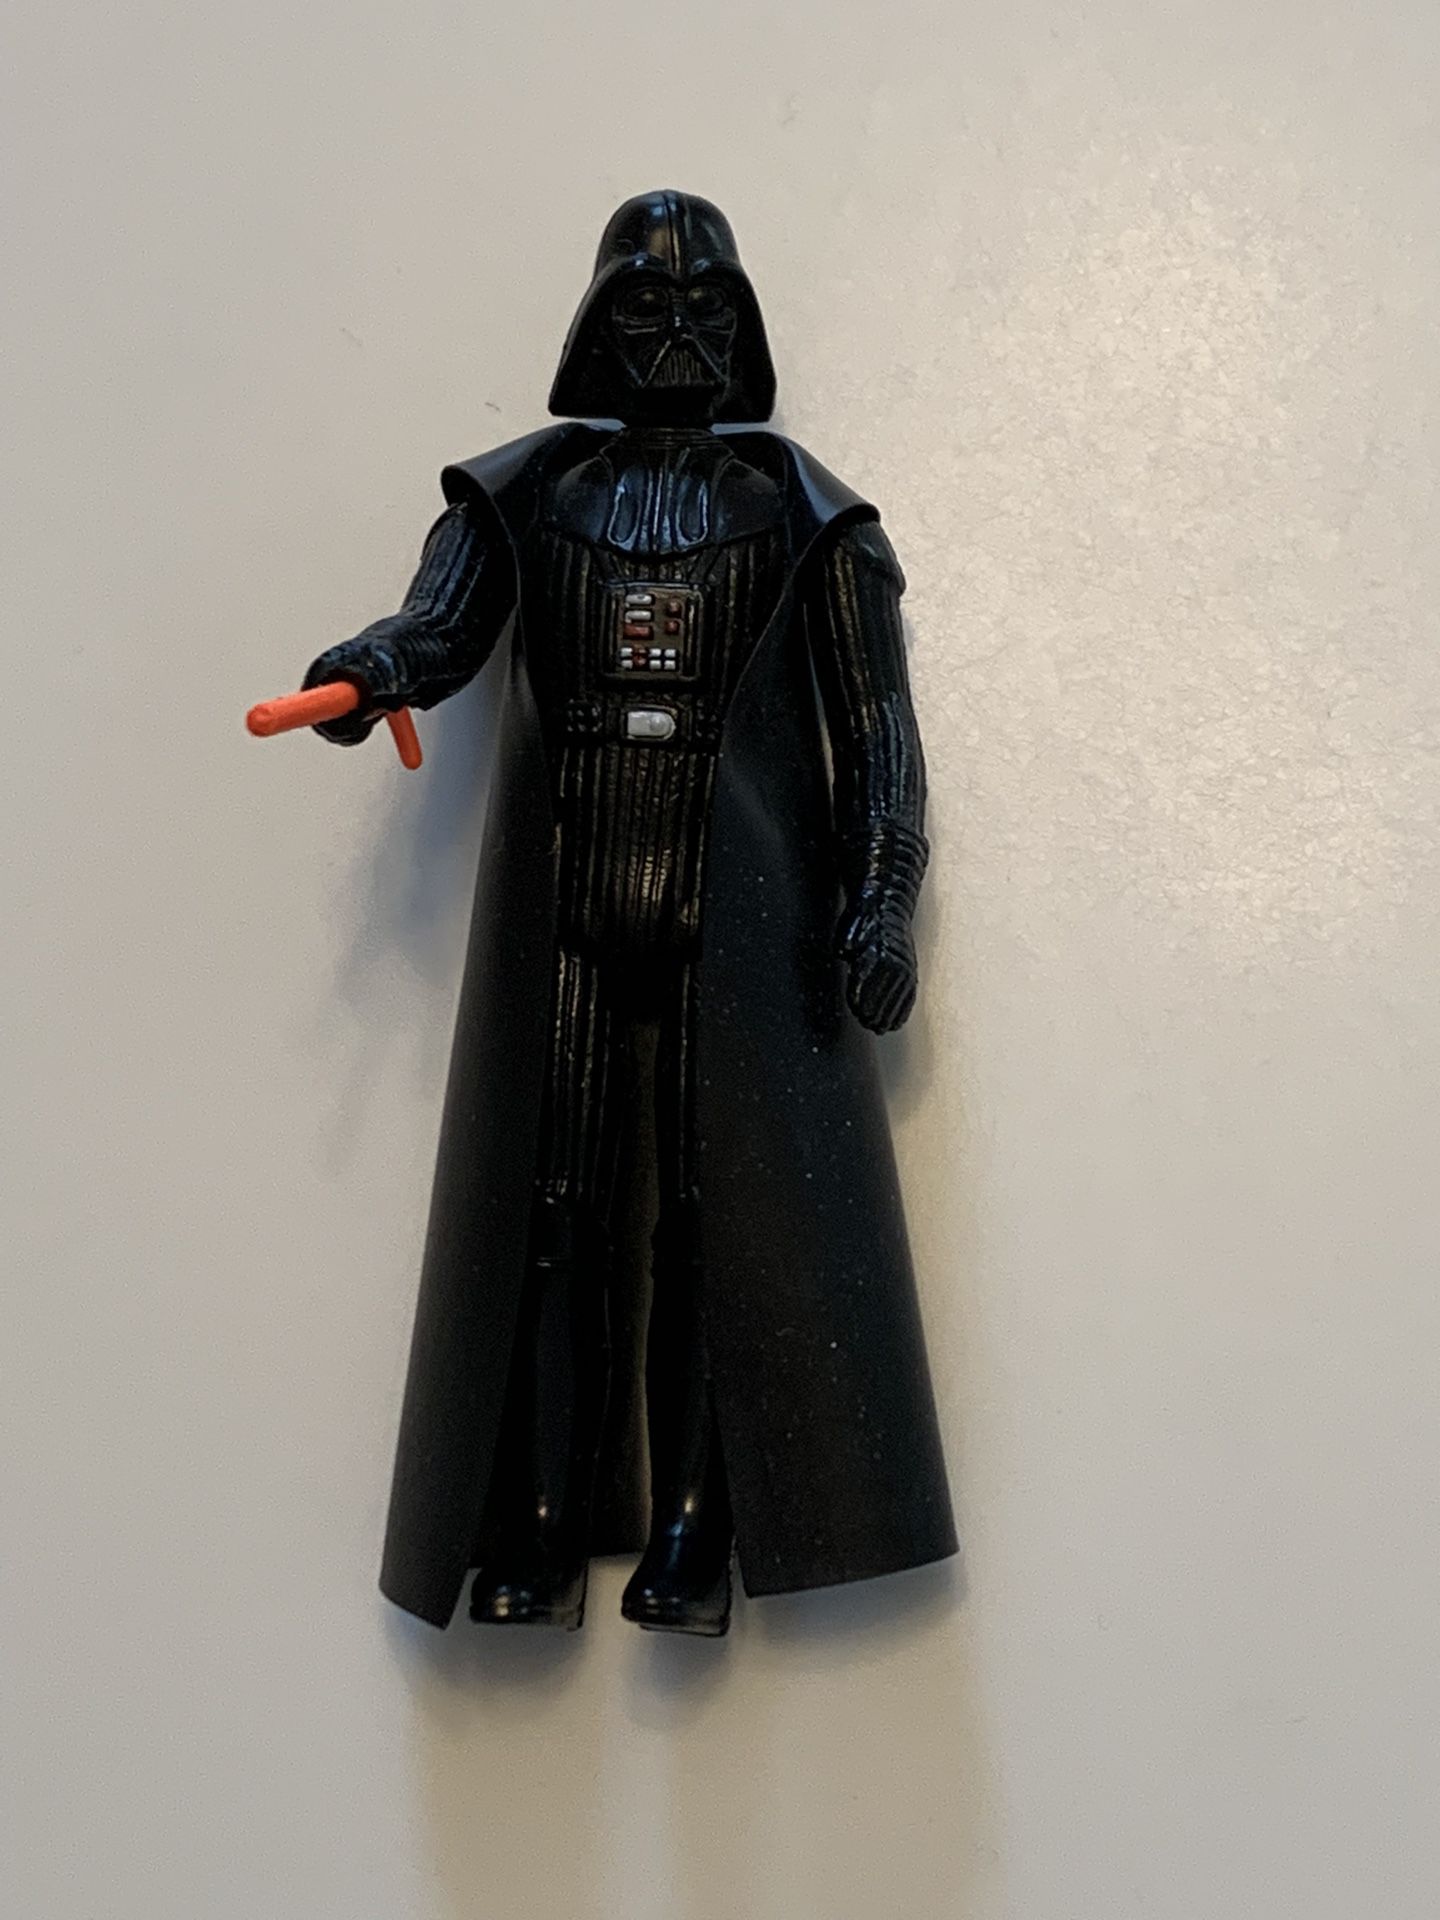 STAR WARS “DARTH VADER” from 1977 with FULL CAPE and LIGHT SABER (missing tip)